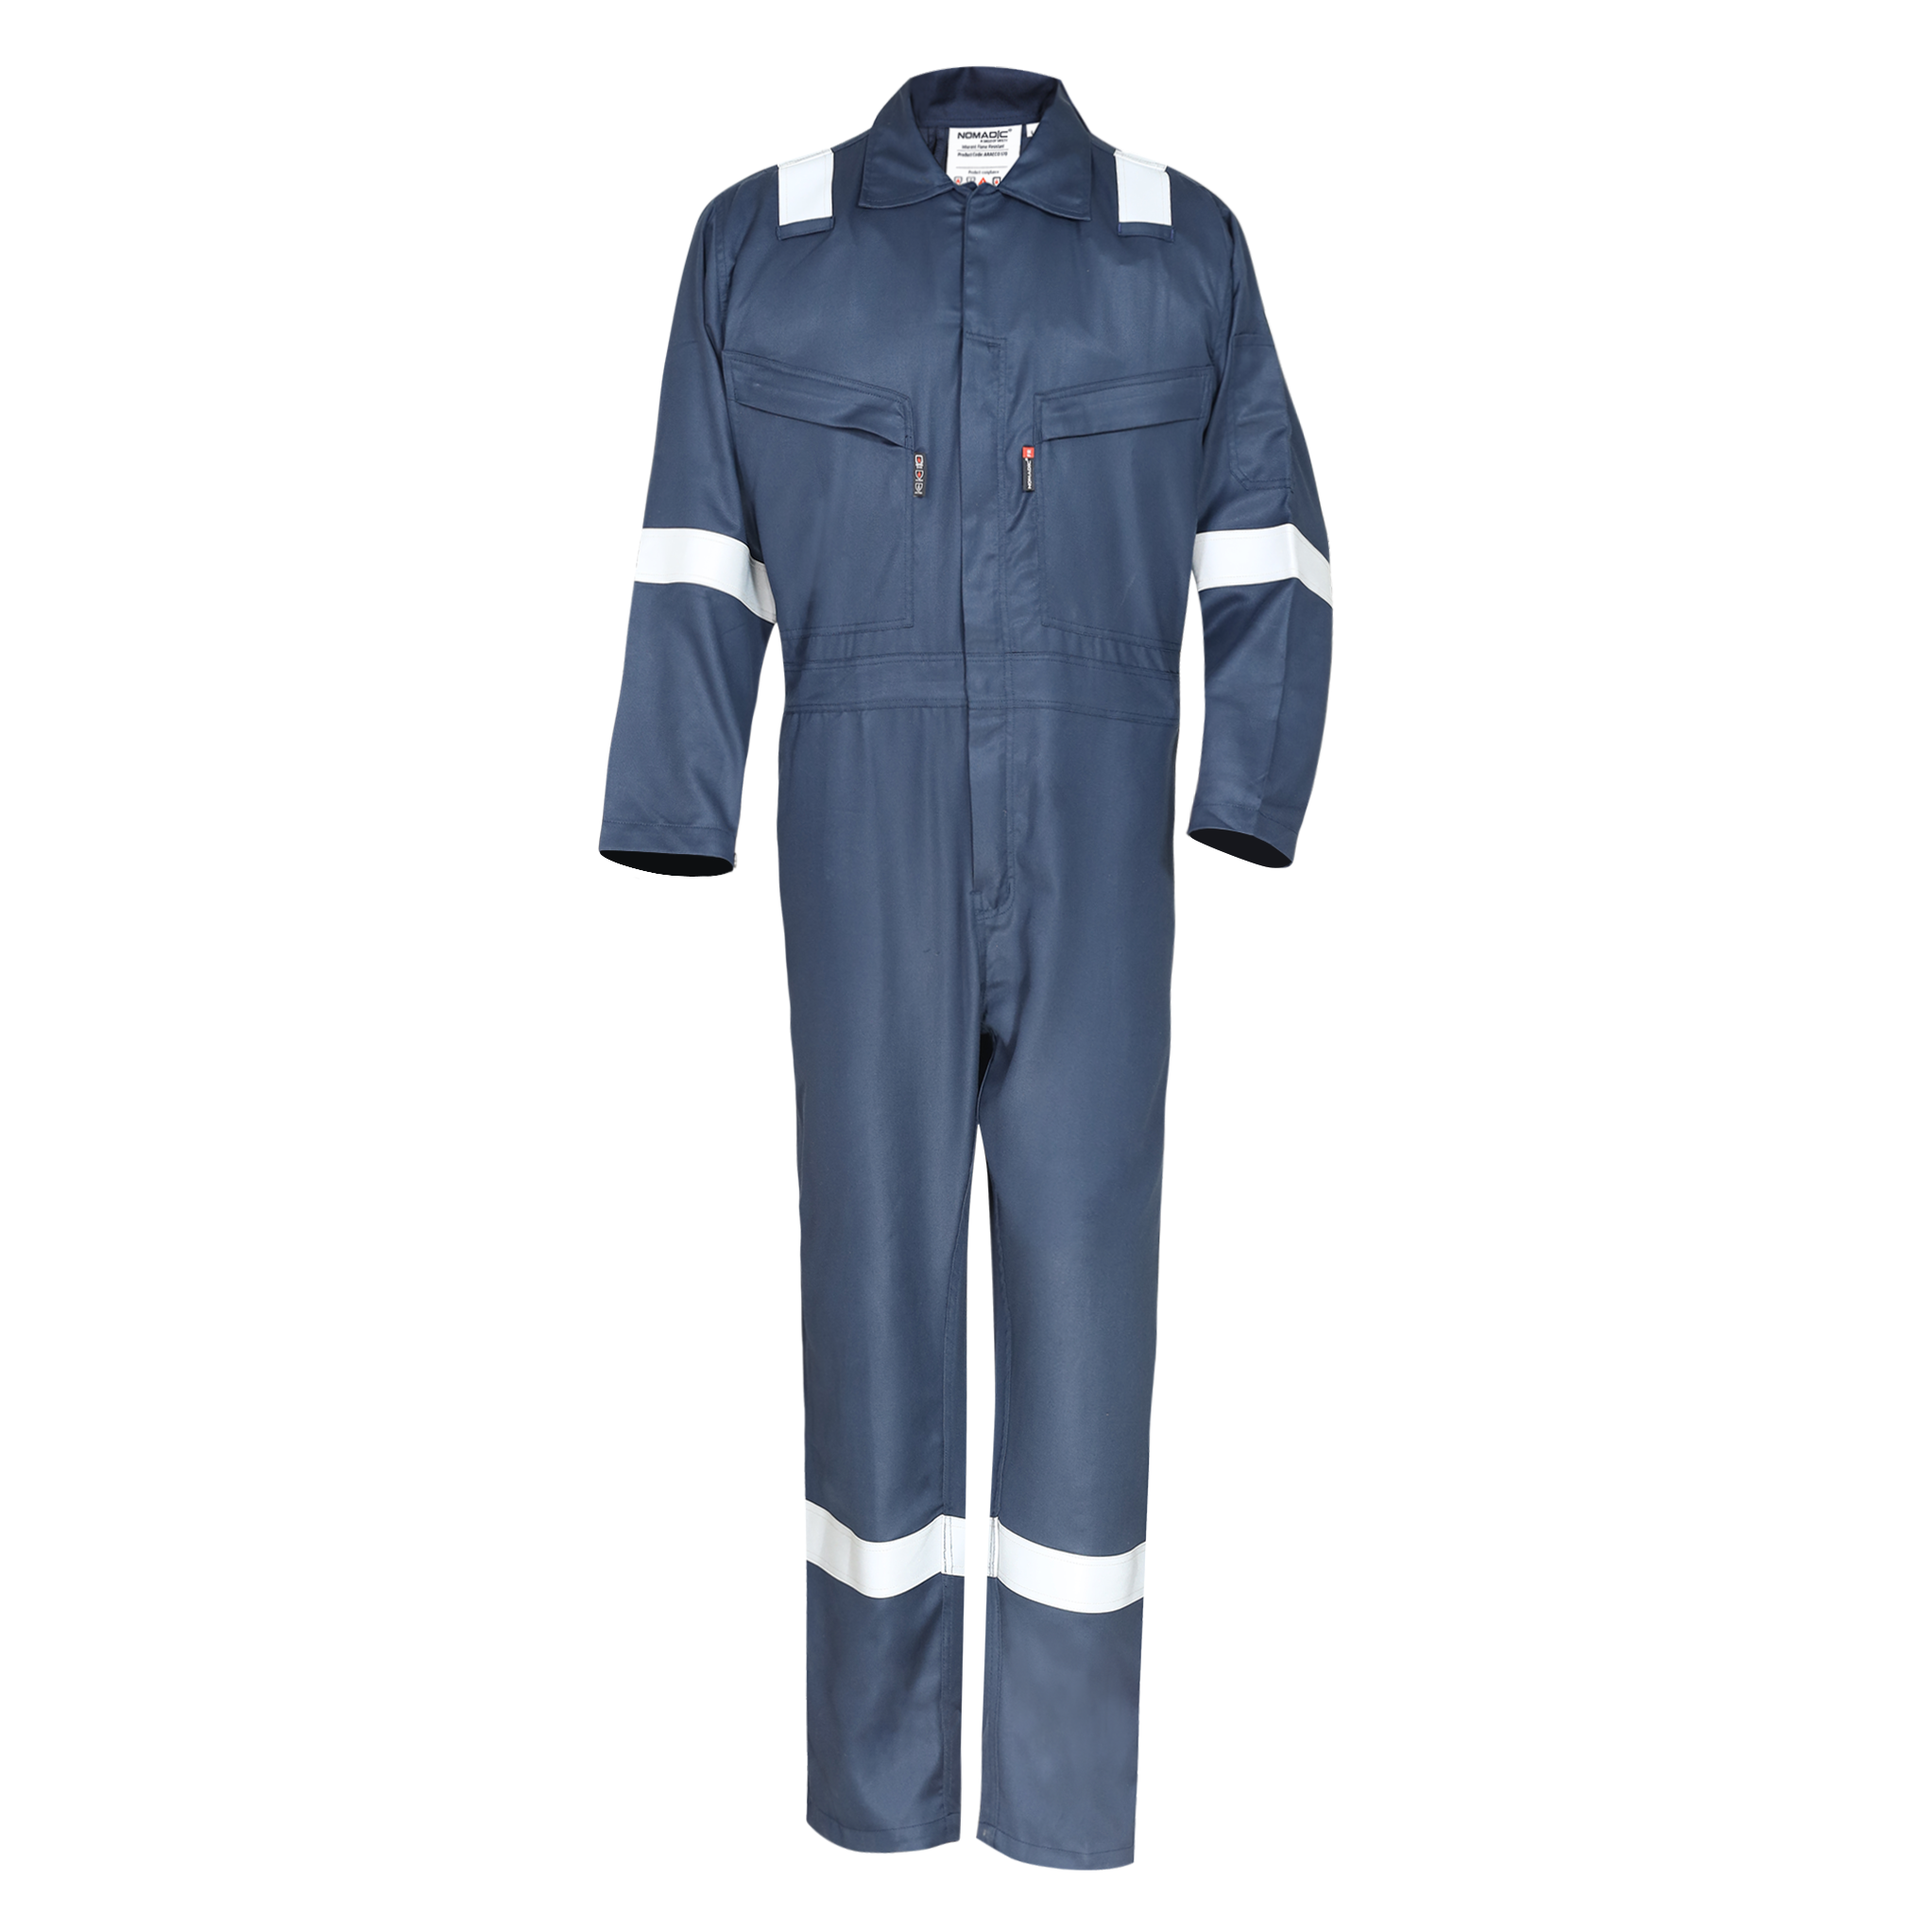 IFR Lite Coverall